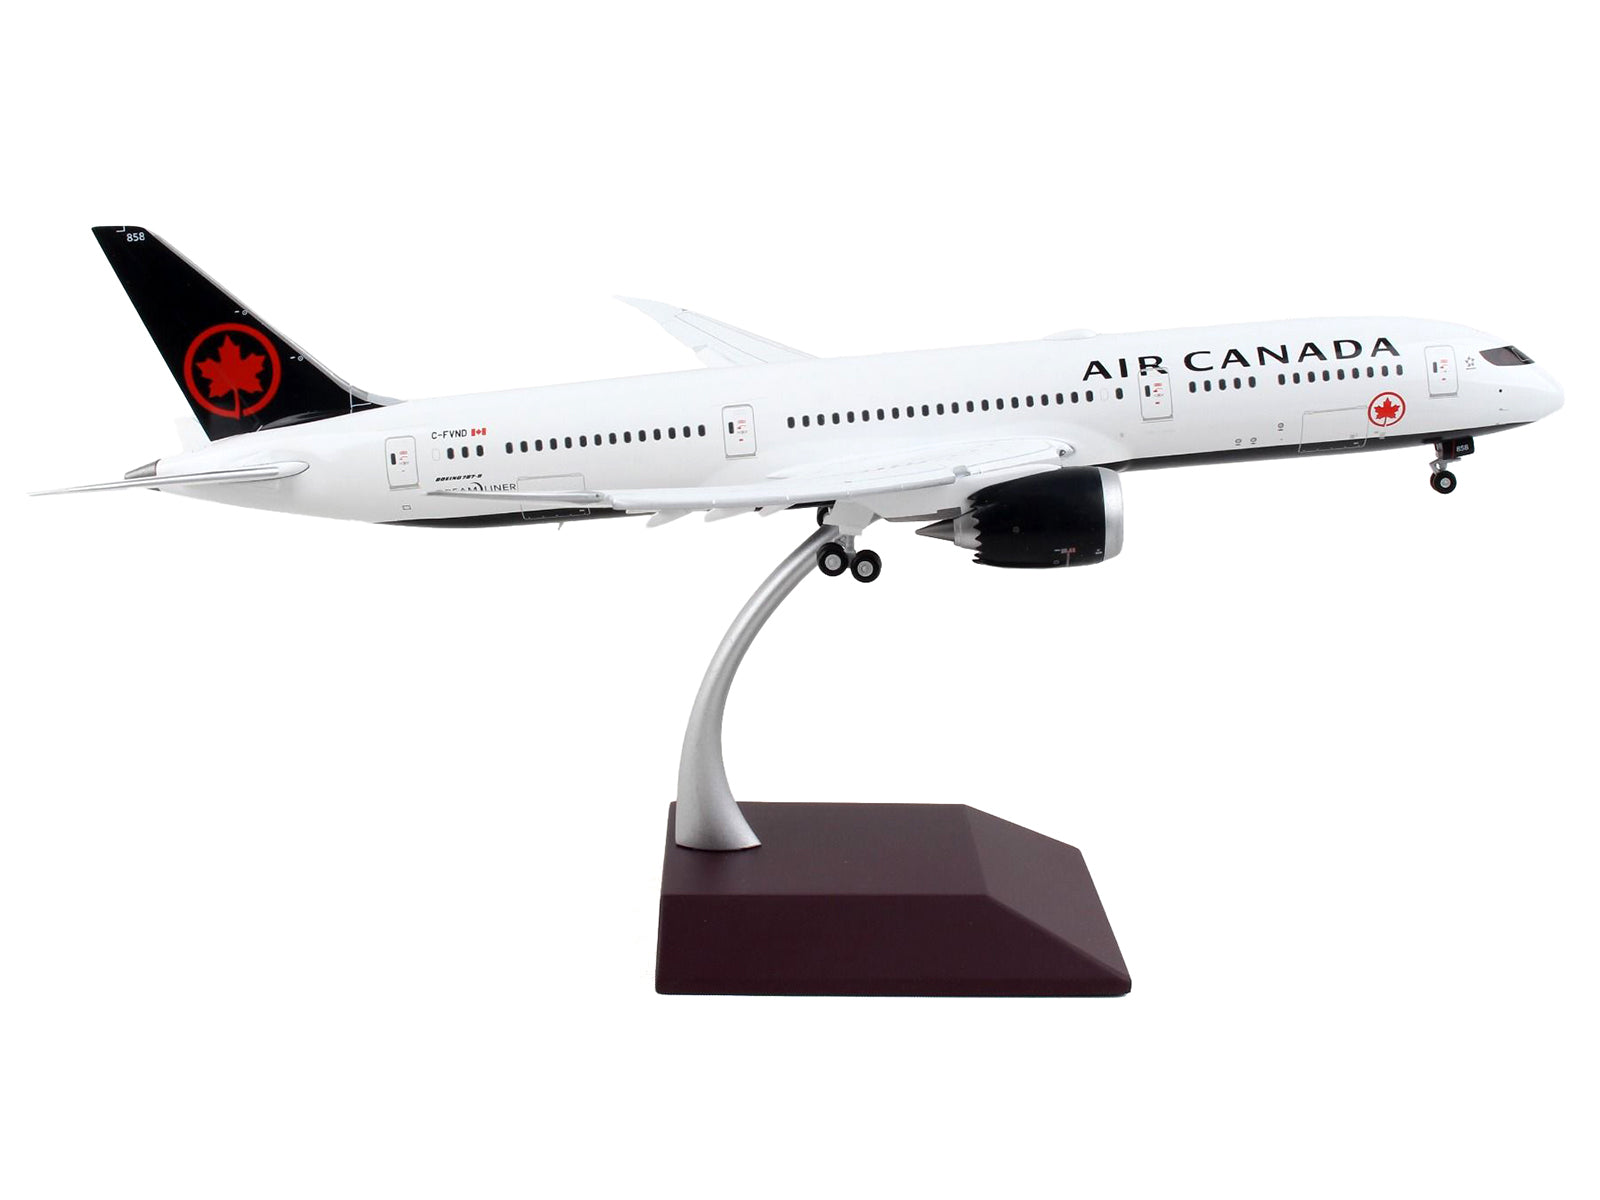 Boeing 787-9 Commercial Aircraft with Flaps Down "Air Canada" White with Black Tail "Gemini 200" Series 1/200 Diecast Model Airplane by GeminiJets